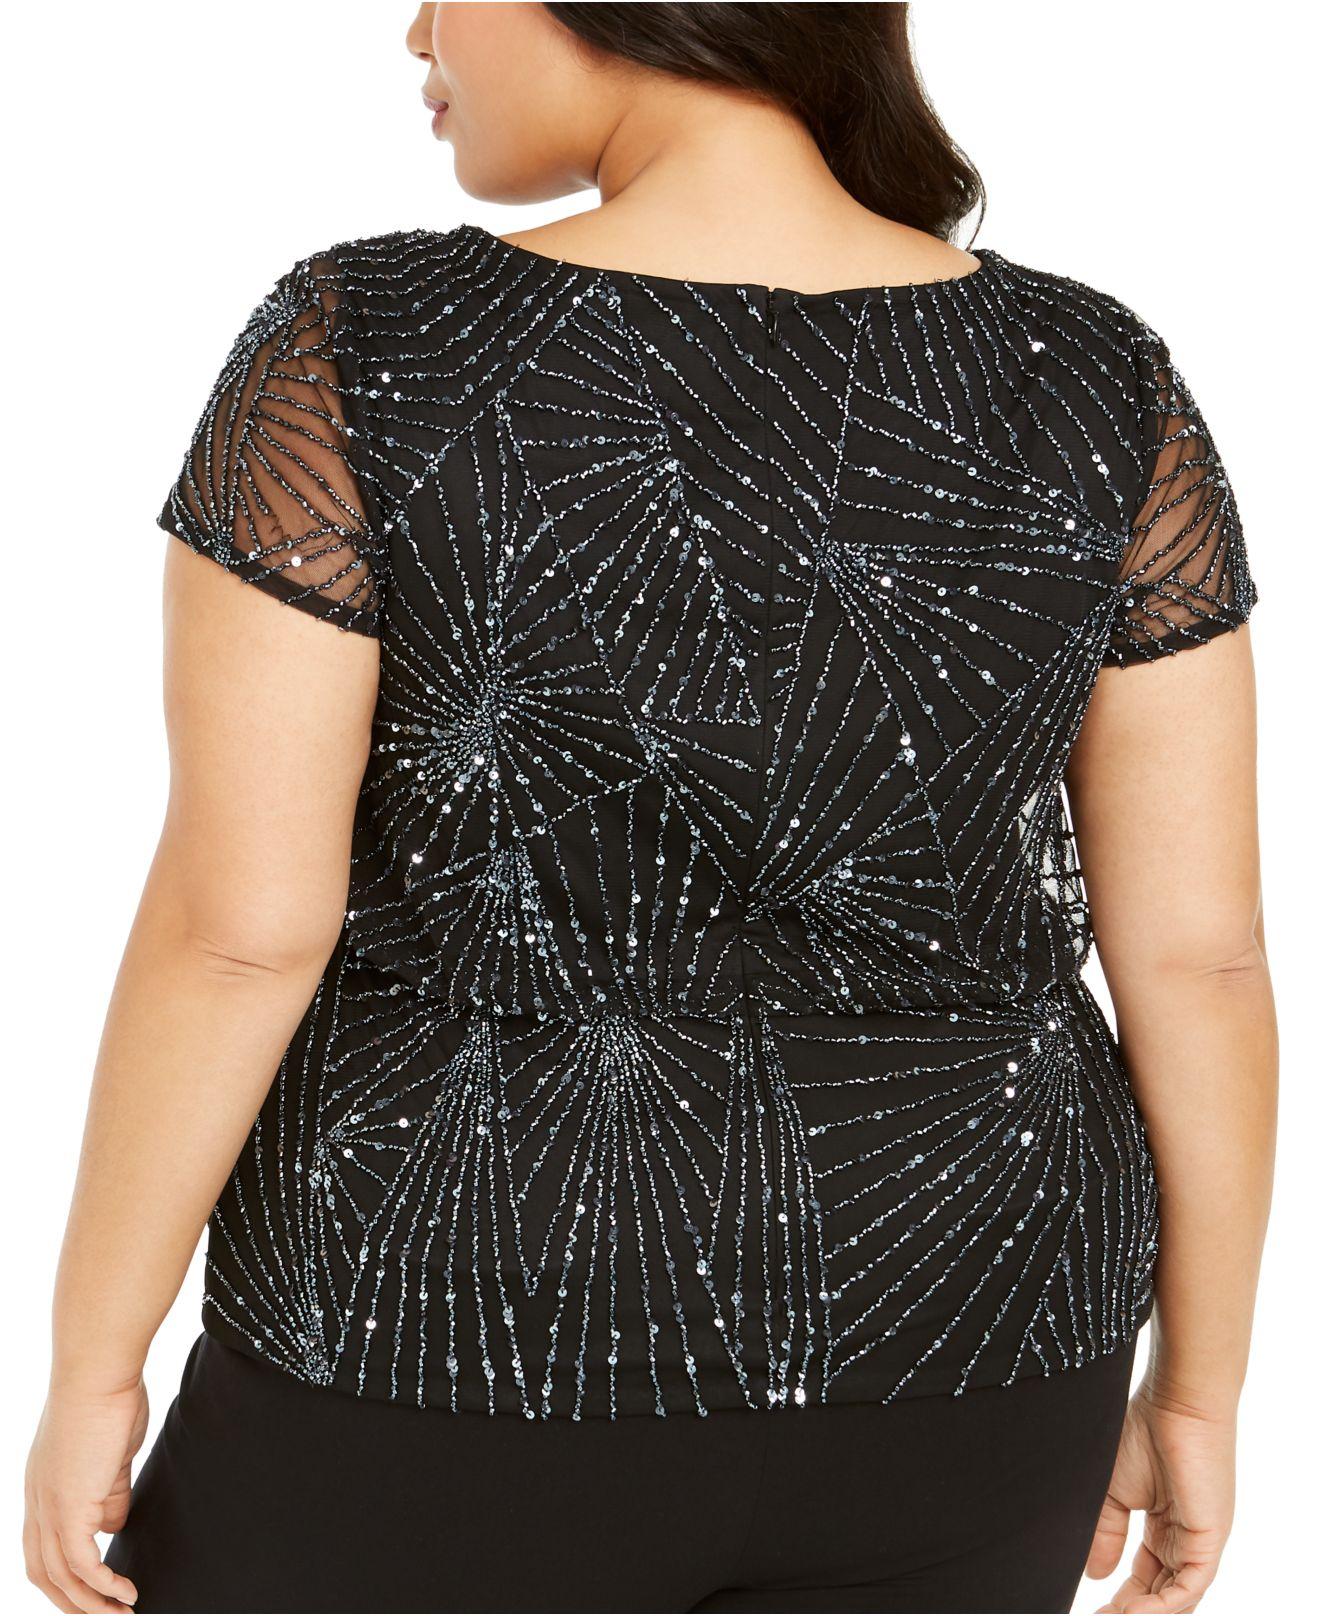 Adrianna Papell Synthetic Plus Size Embellished Mesh Top in Black - Lyst